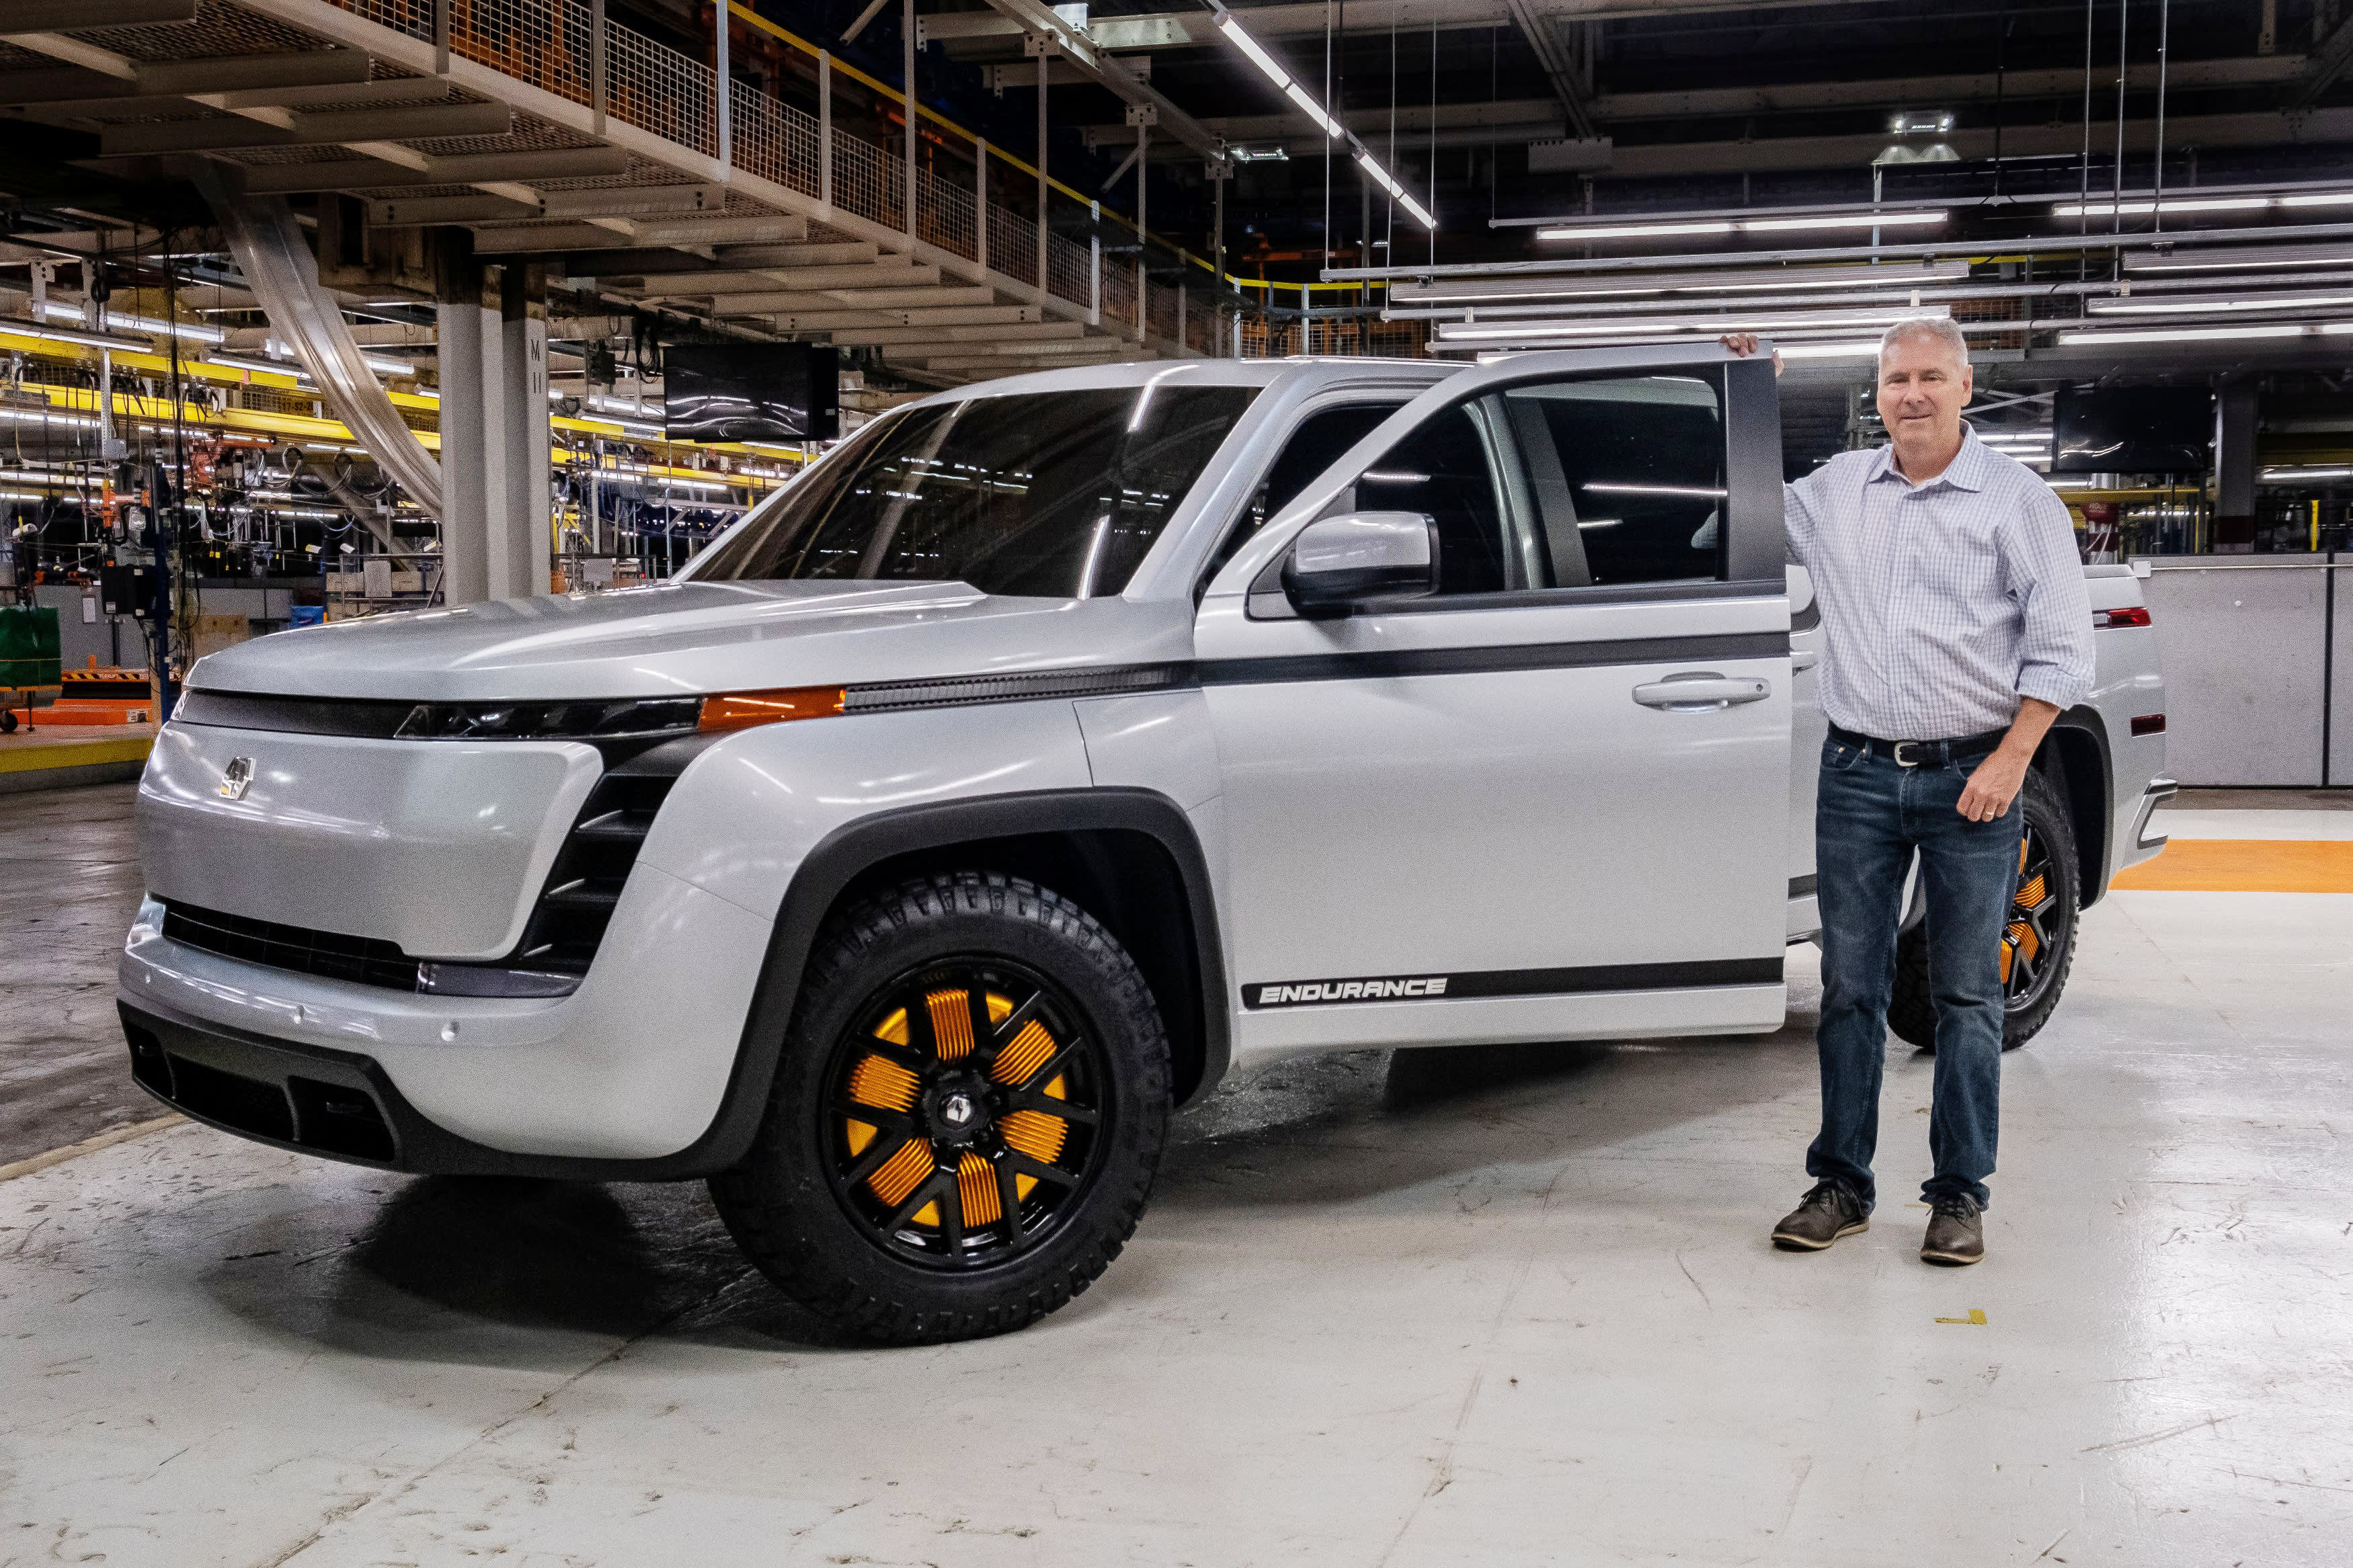 Lordstown Motors said Monday that CEO Steve Burns and CFO Julio Rodriguez have resigned, days after the electric truck maker warned that it had "